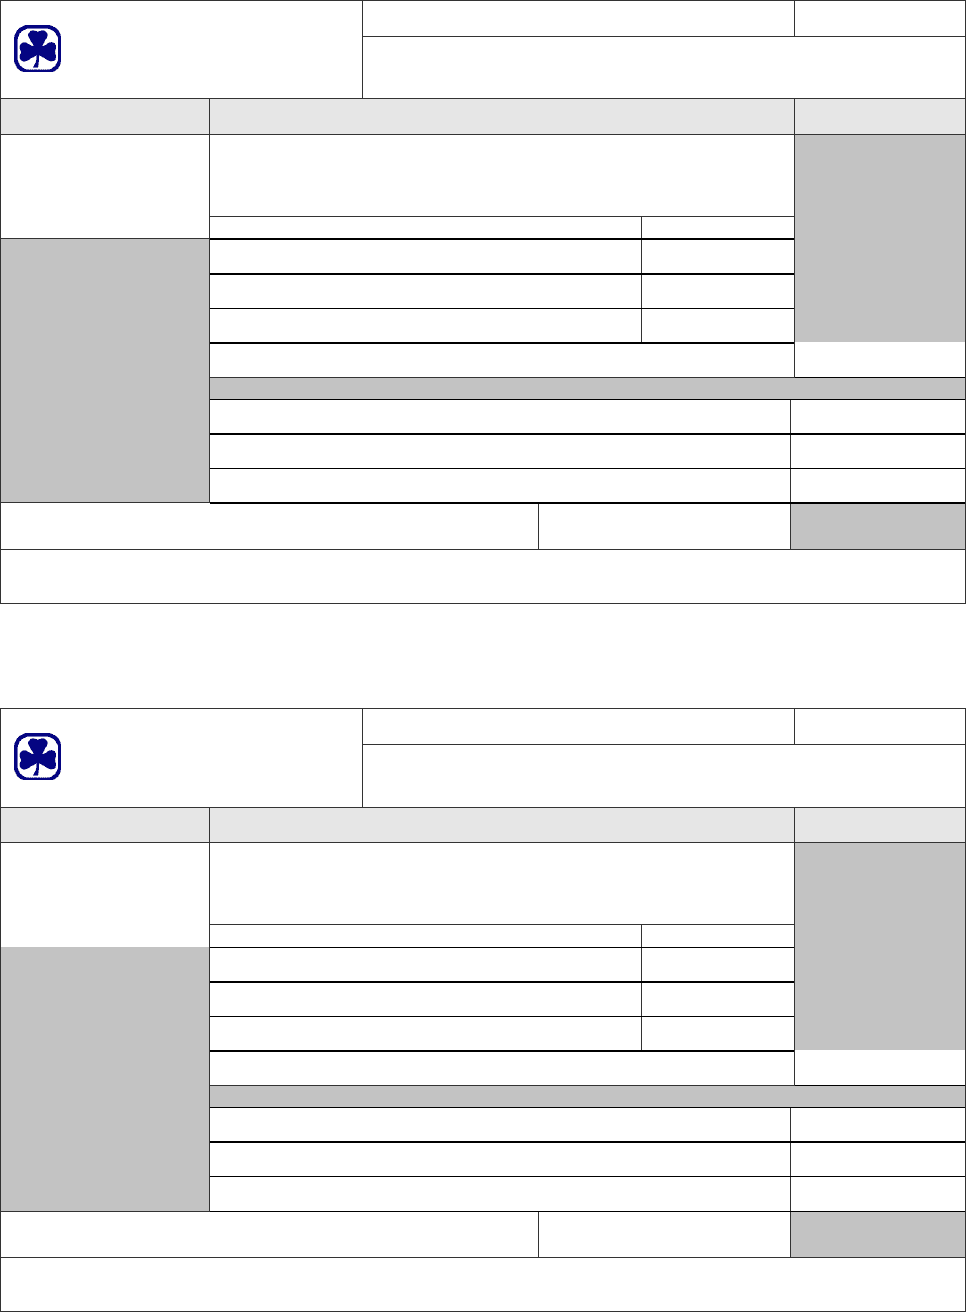 Receipt Template For Photoshop